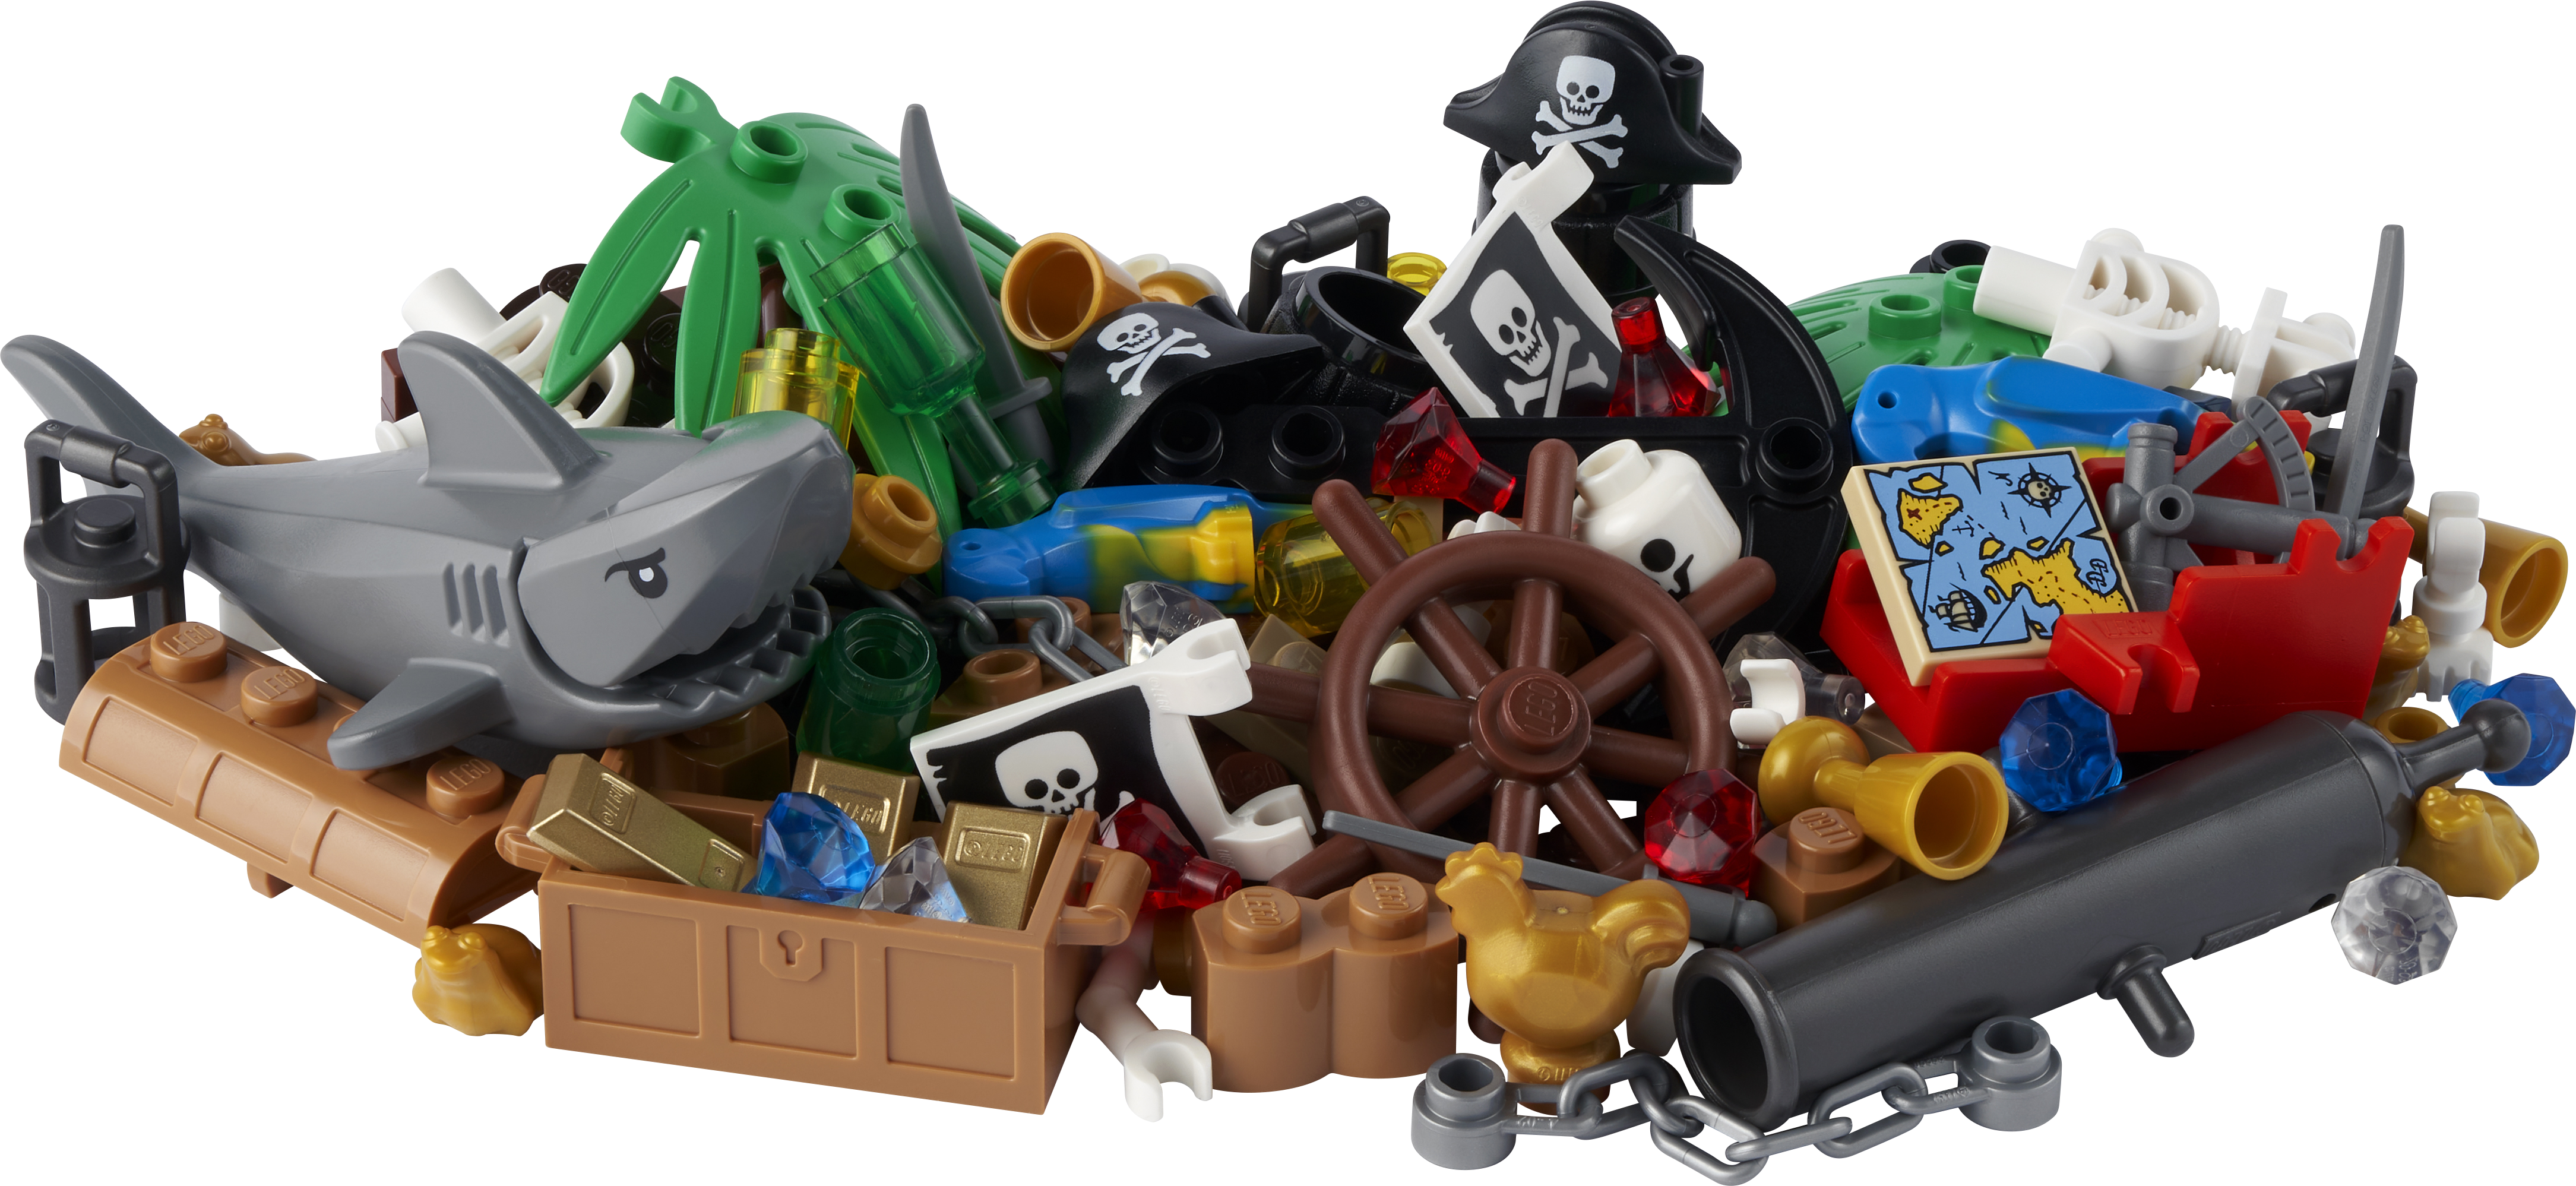 Pirates and Treasure VIP Add-on Pack 40515 | Other | Buy online at the Official LEGO® Shop